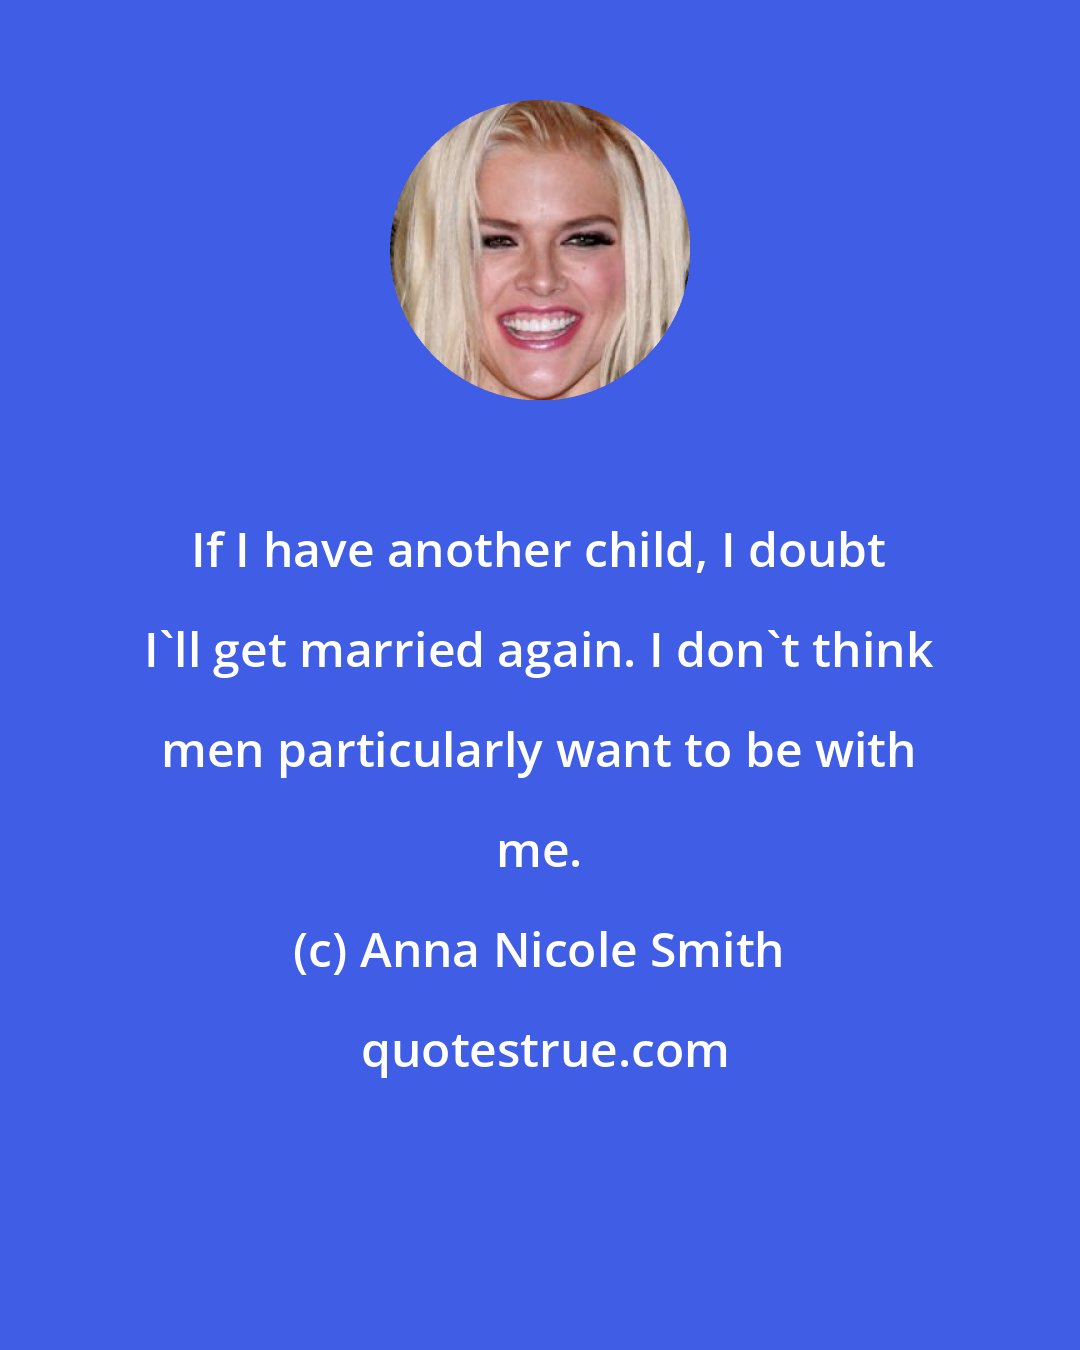 Anna Nicole Smith: If I have another child, I doubt I'll get married again. I don't think men particularly want to be with me.